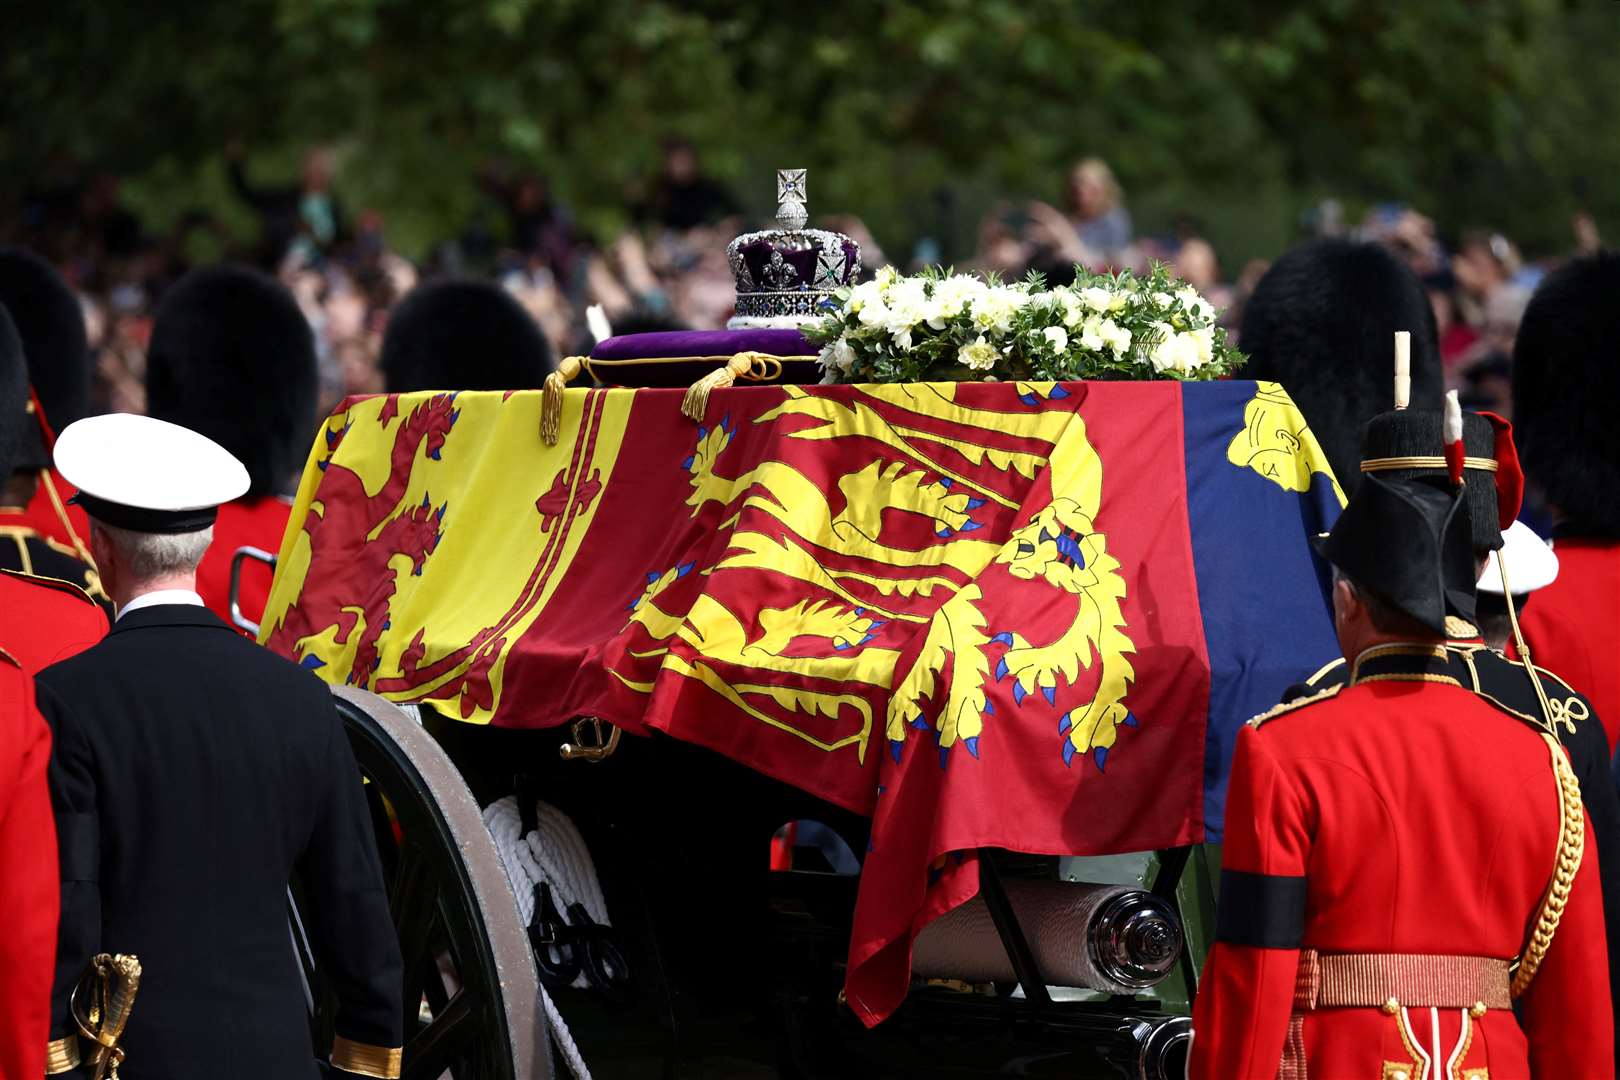 The coffin of the Queen, draped in the Royal Standard with the Imperial State Crown placed on top, is carried on a horse-drawn gun carriage of the King’s Troop Royal Horse Artillery during the ceremonial procession from Buckingham Palace to Westminster Hall (Henry Nicholls/PA)